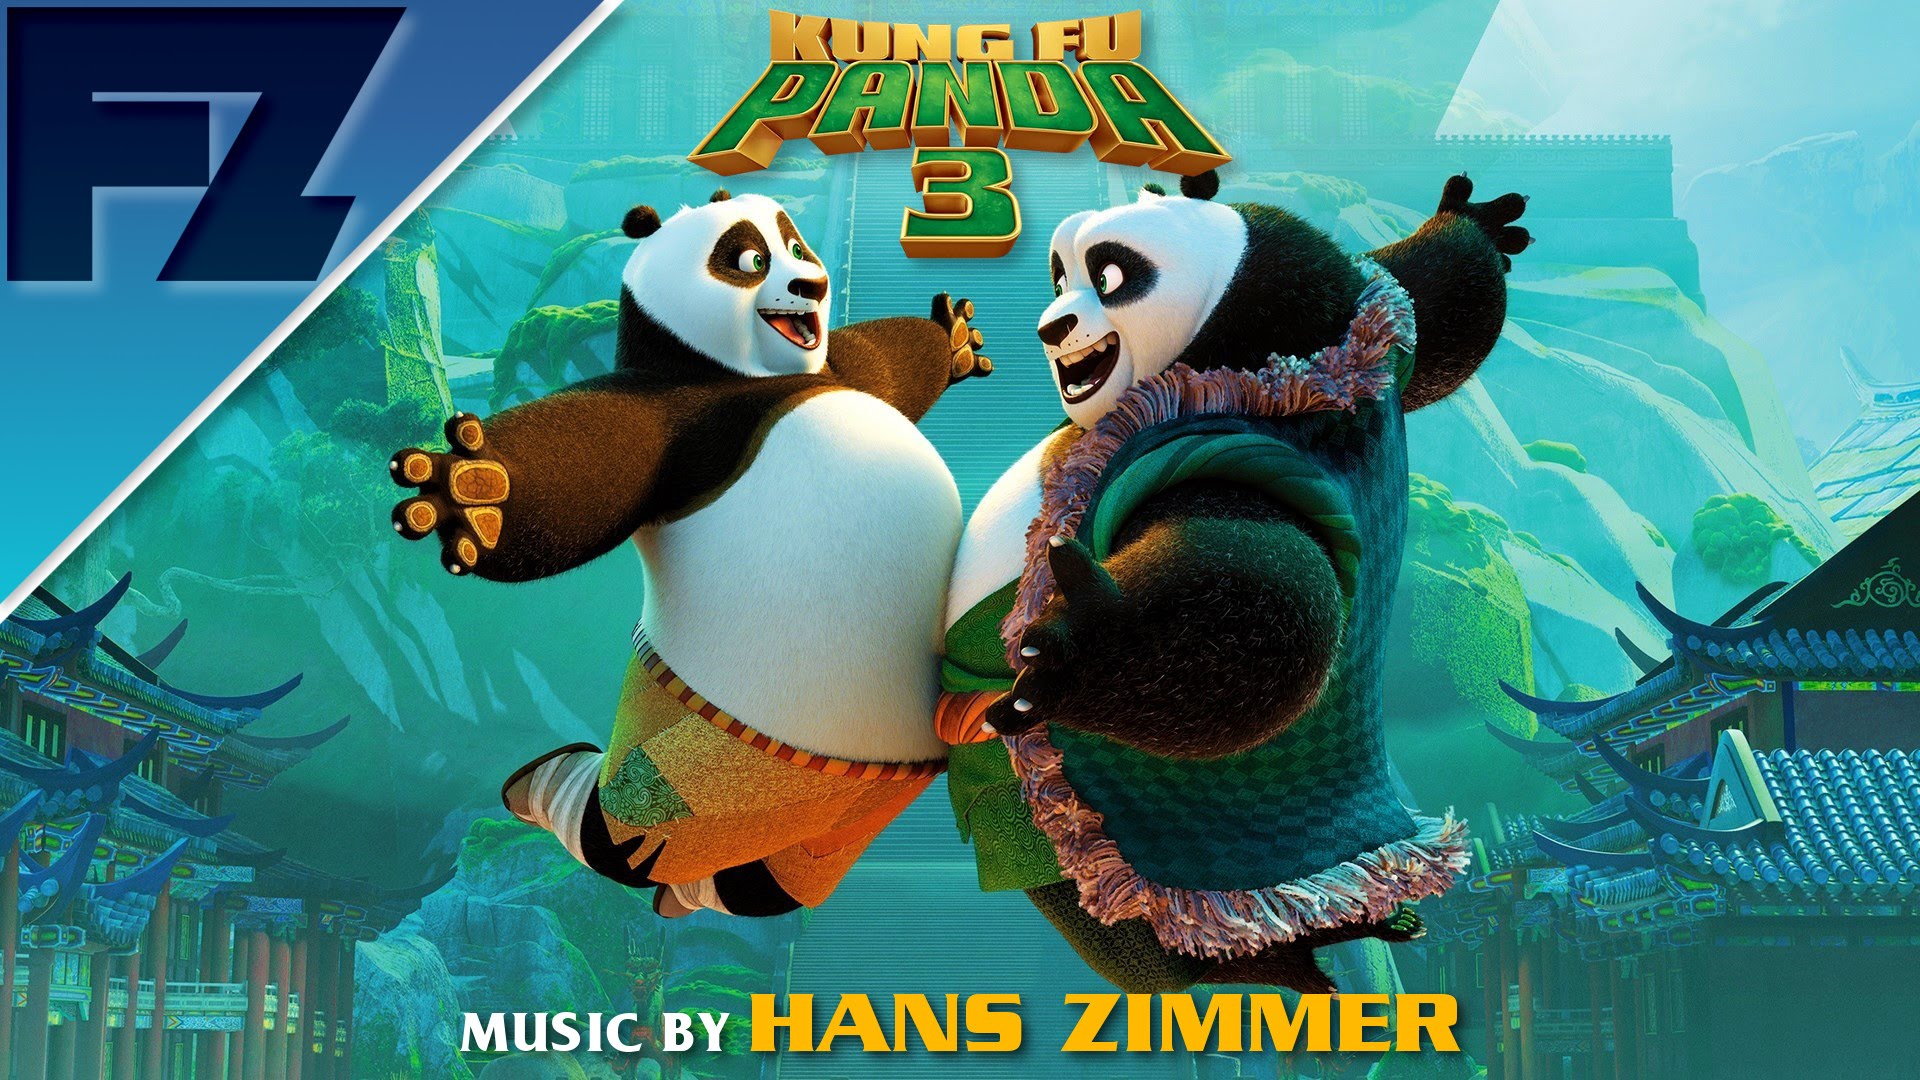 Kung Fu Panda 3 (Soundtrack Samples) – The Arrival of Kai / Jaded / The Battle of Legends